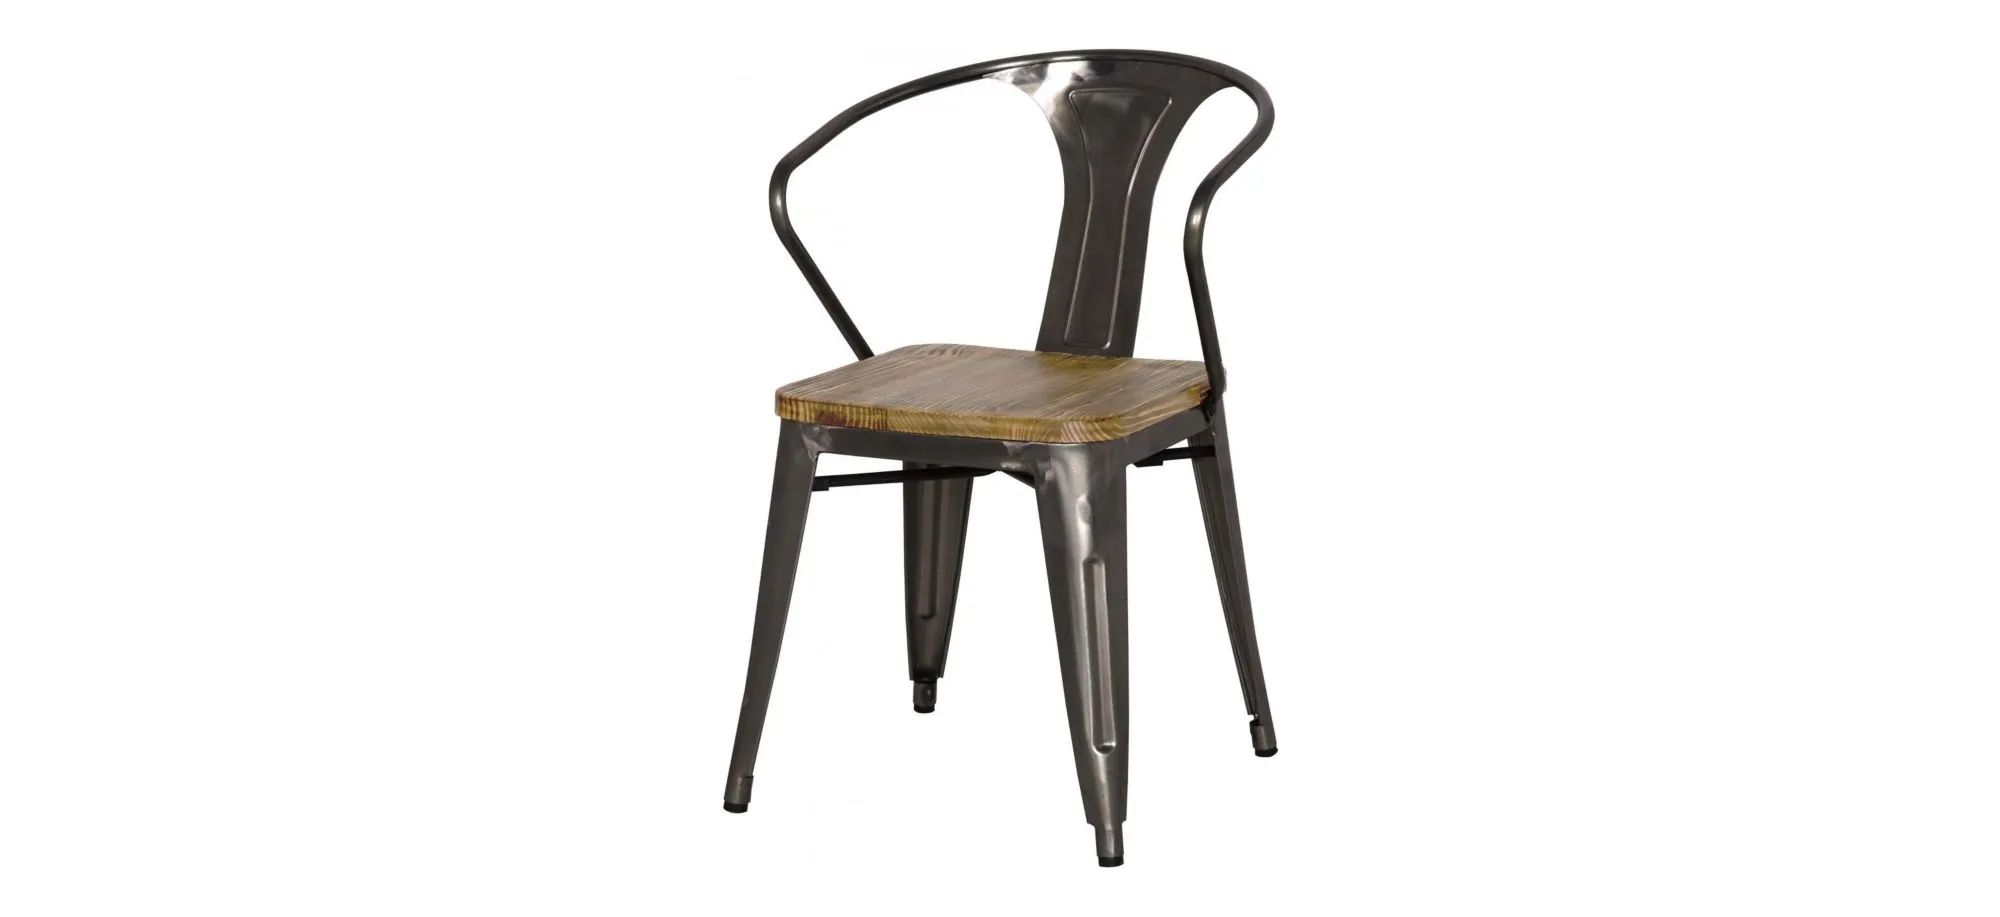 Metropolis Dining Chair: Set of 4 in Gunmetal Gray by New Pacific Direct